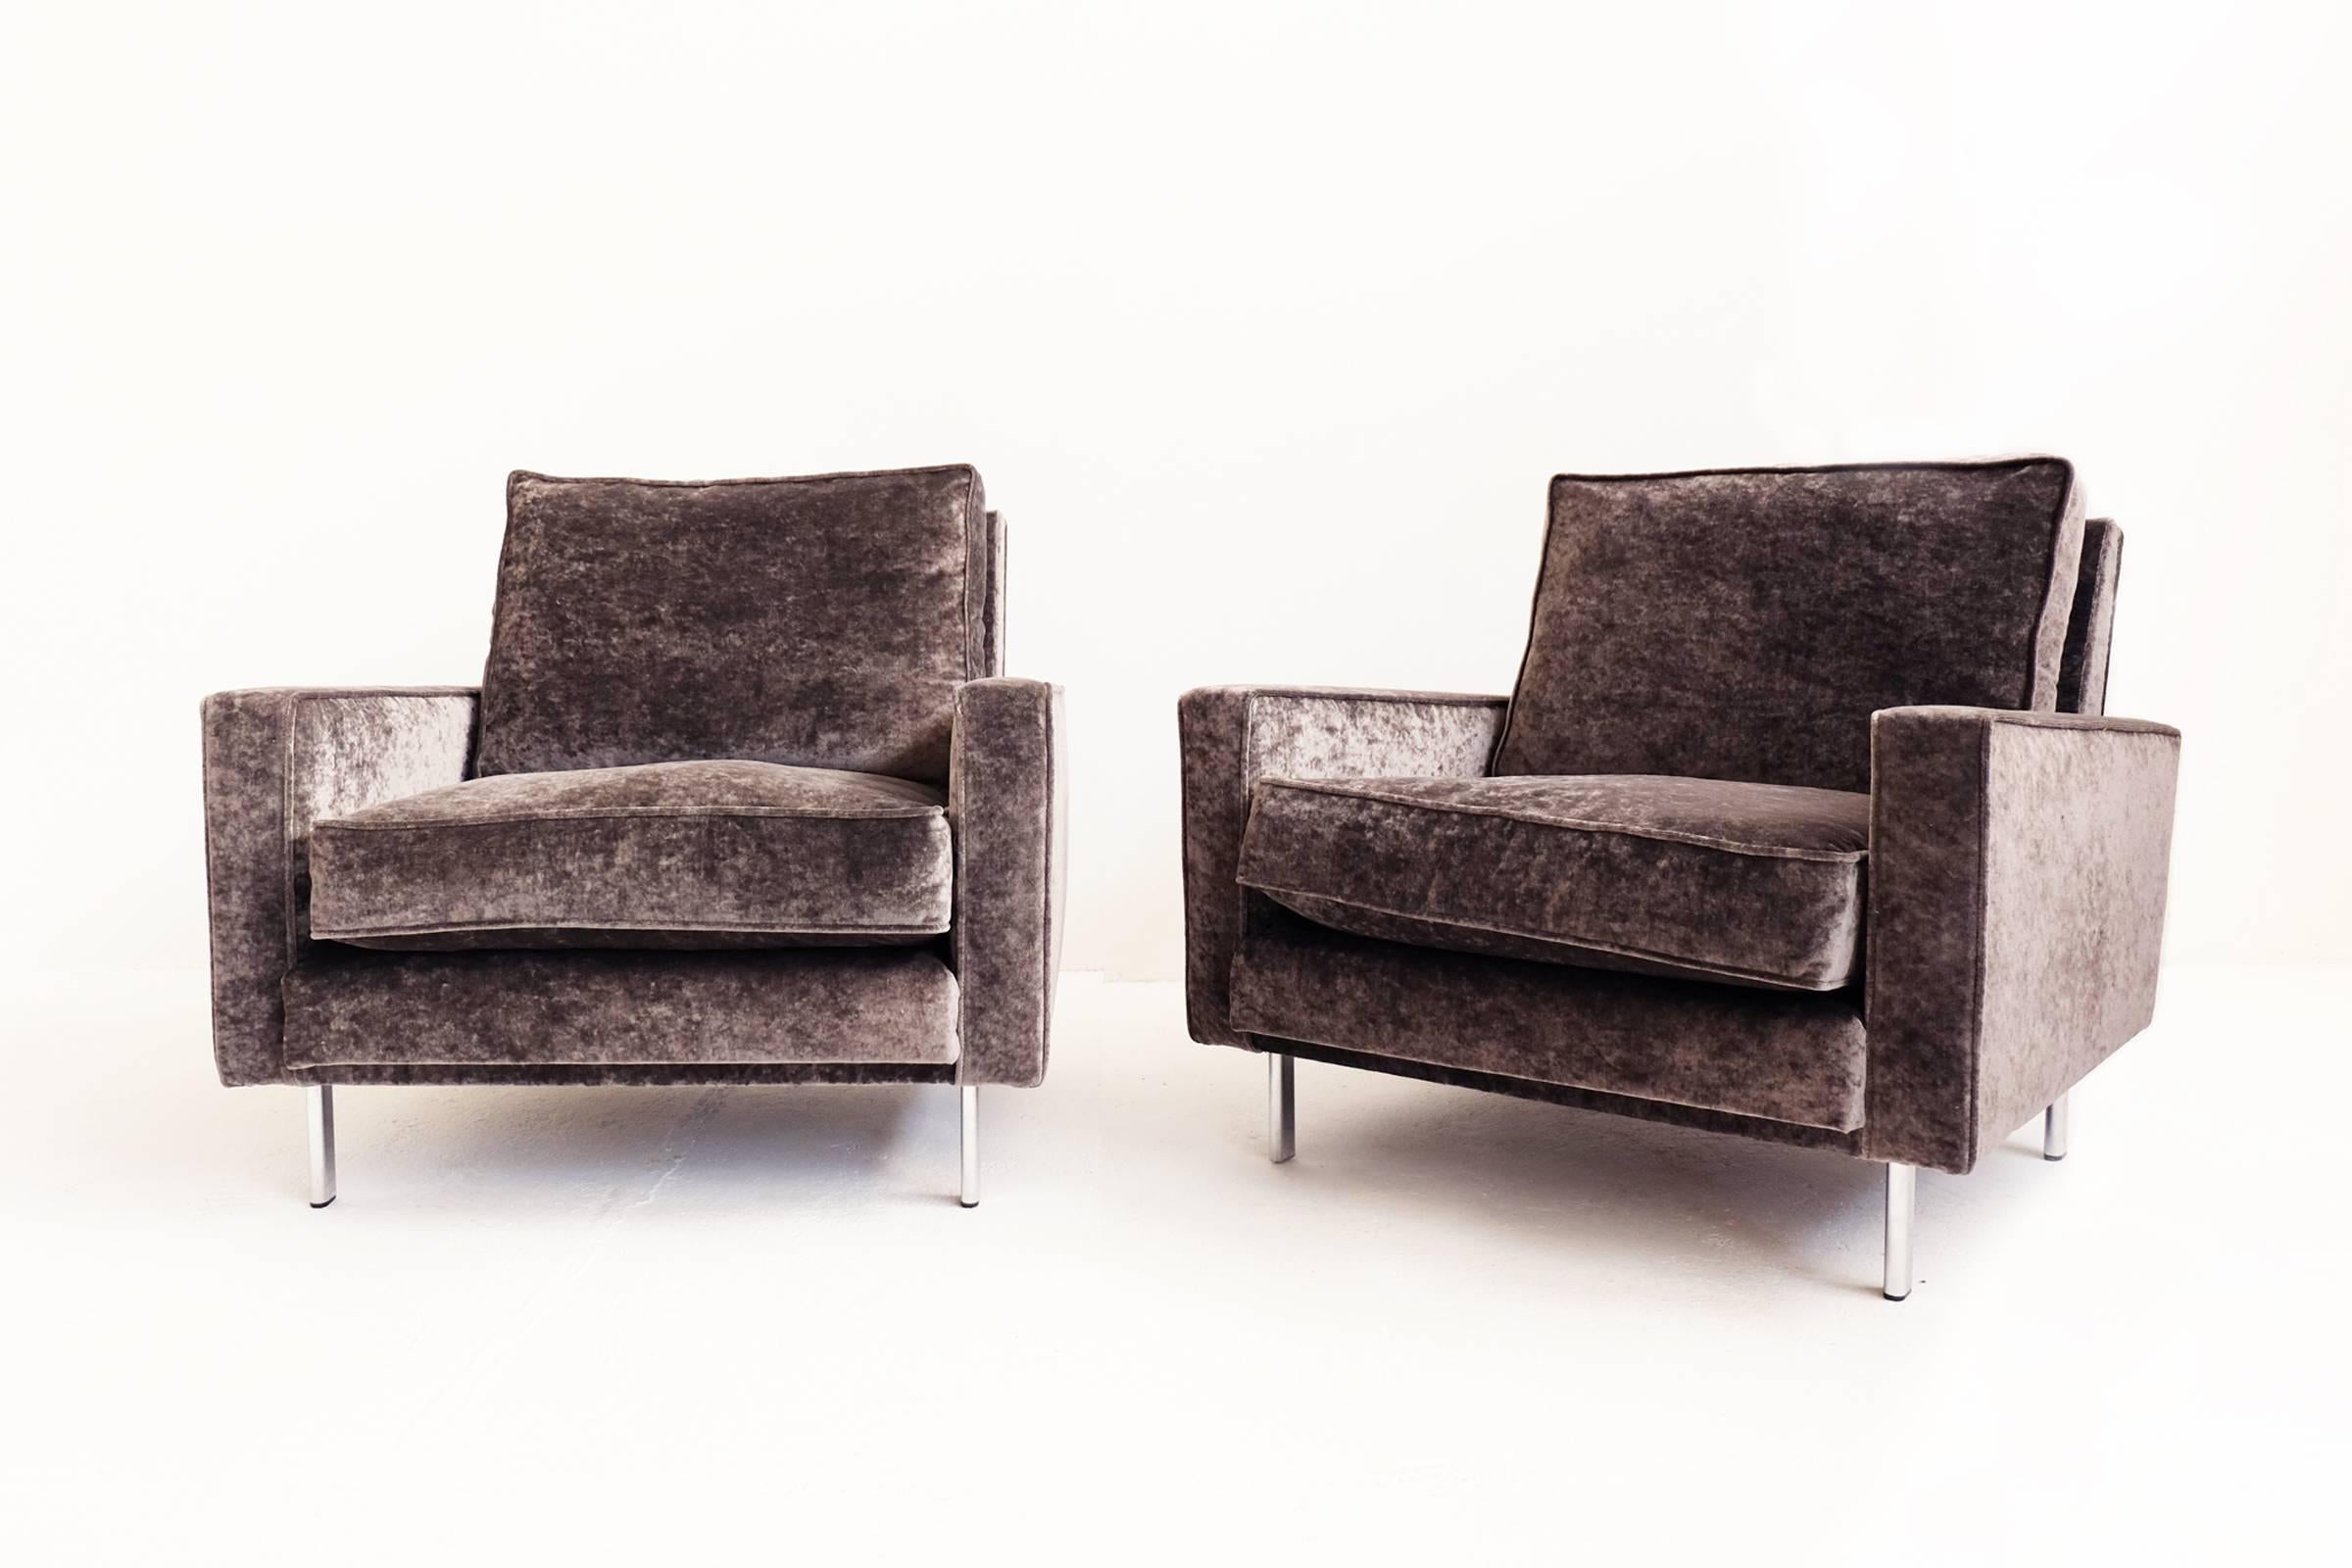 Beautiful pair of super clean line armchairs in the minimal style of Harvey Probber or George Nelson.
Fully refined in first class velvet flax, deep mud color
Feather padded pillows.